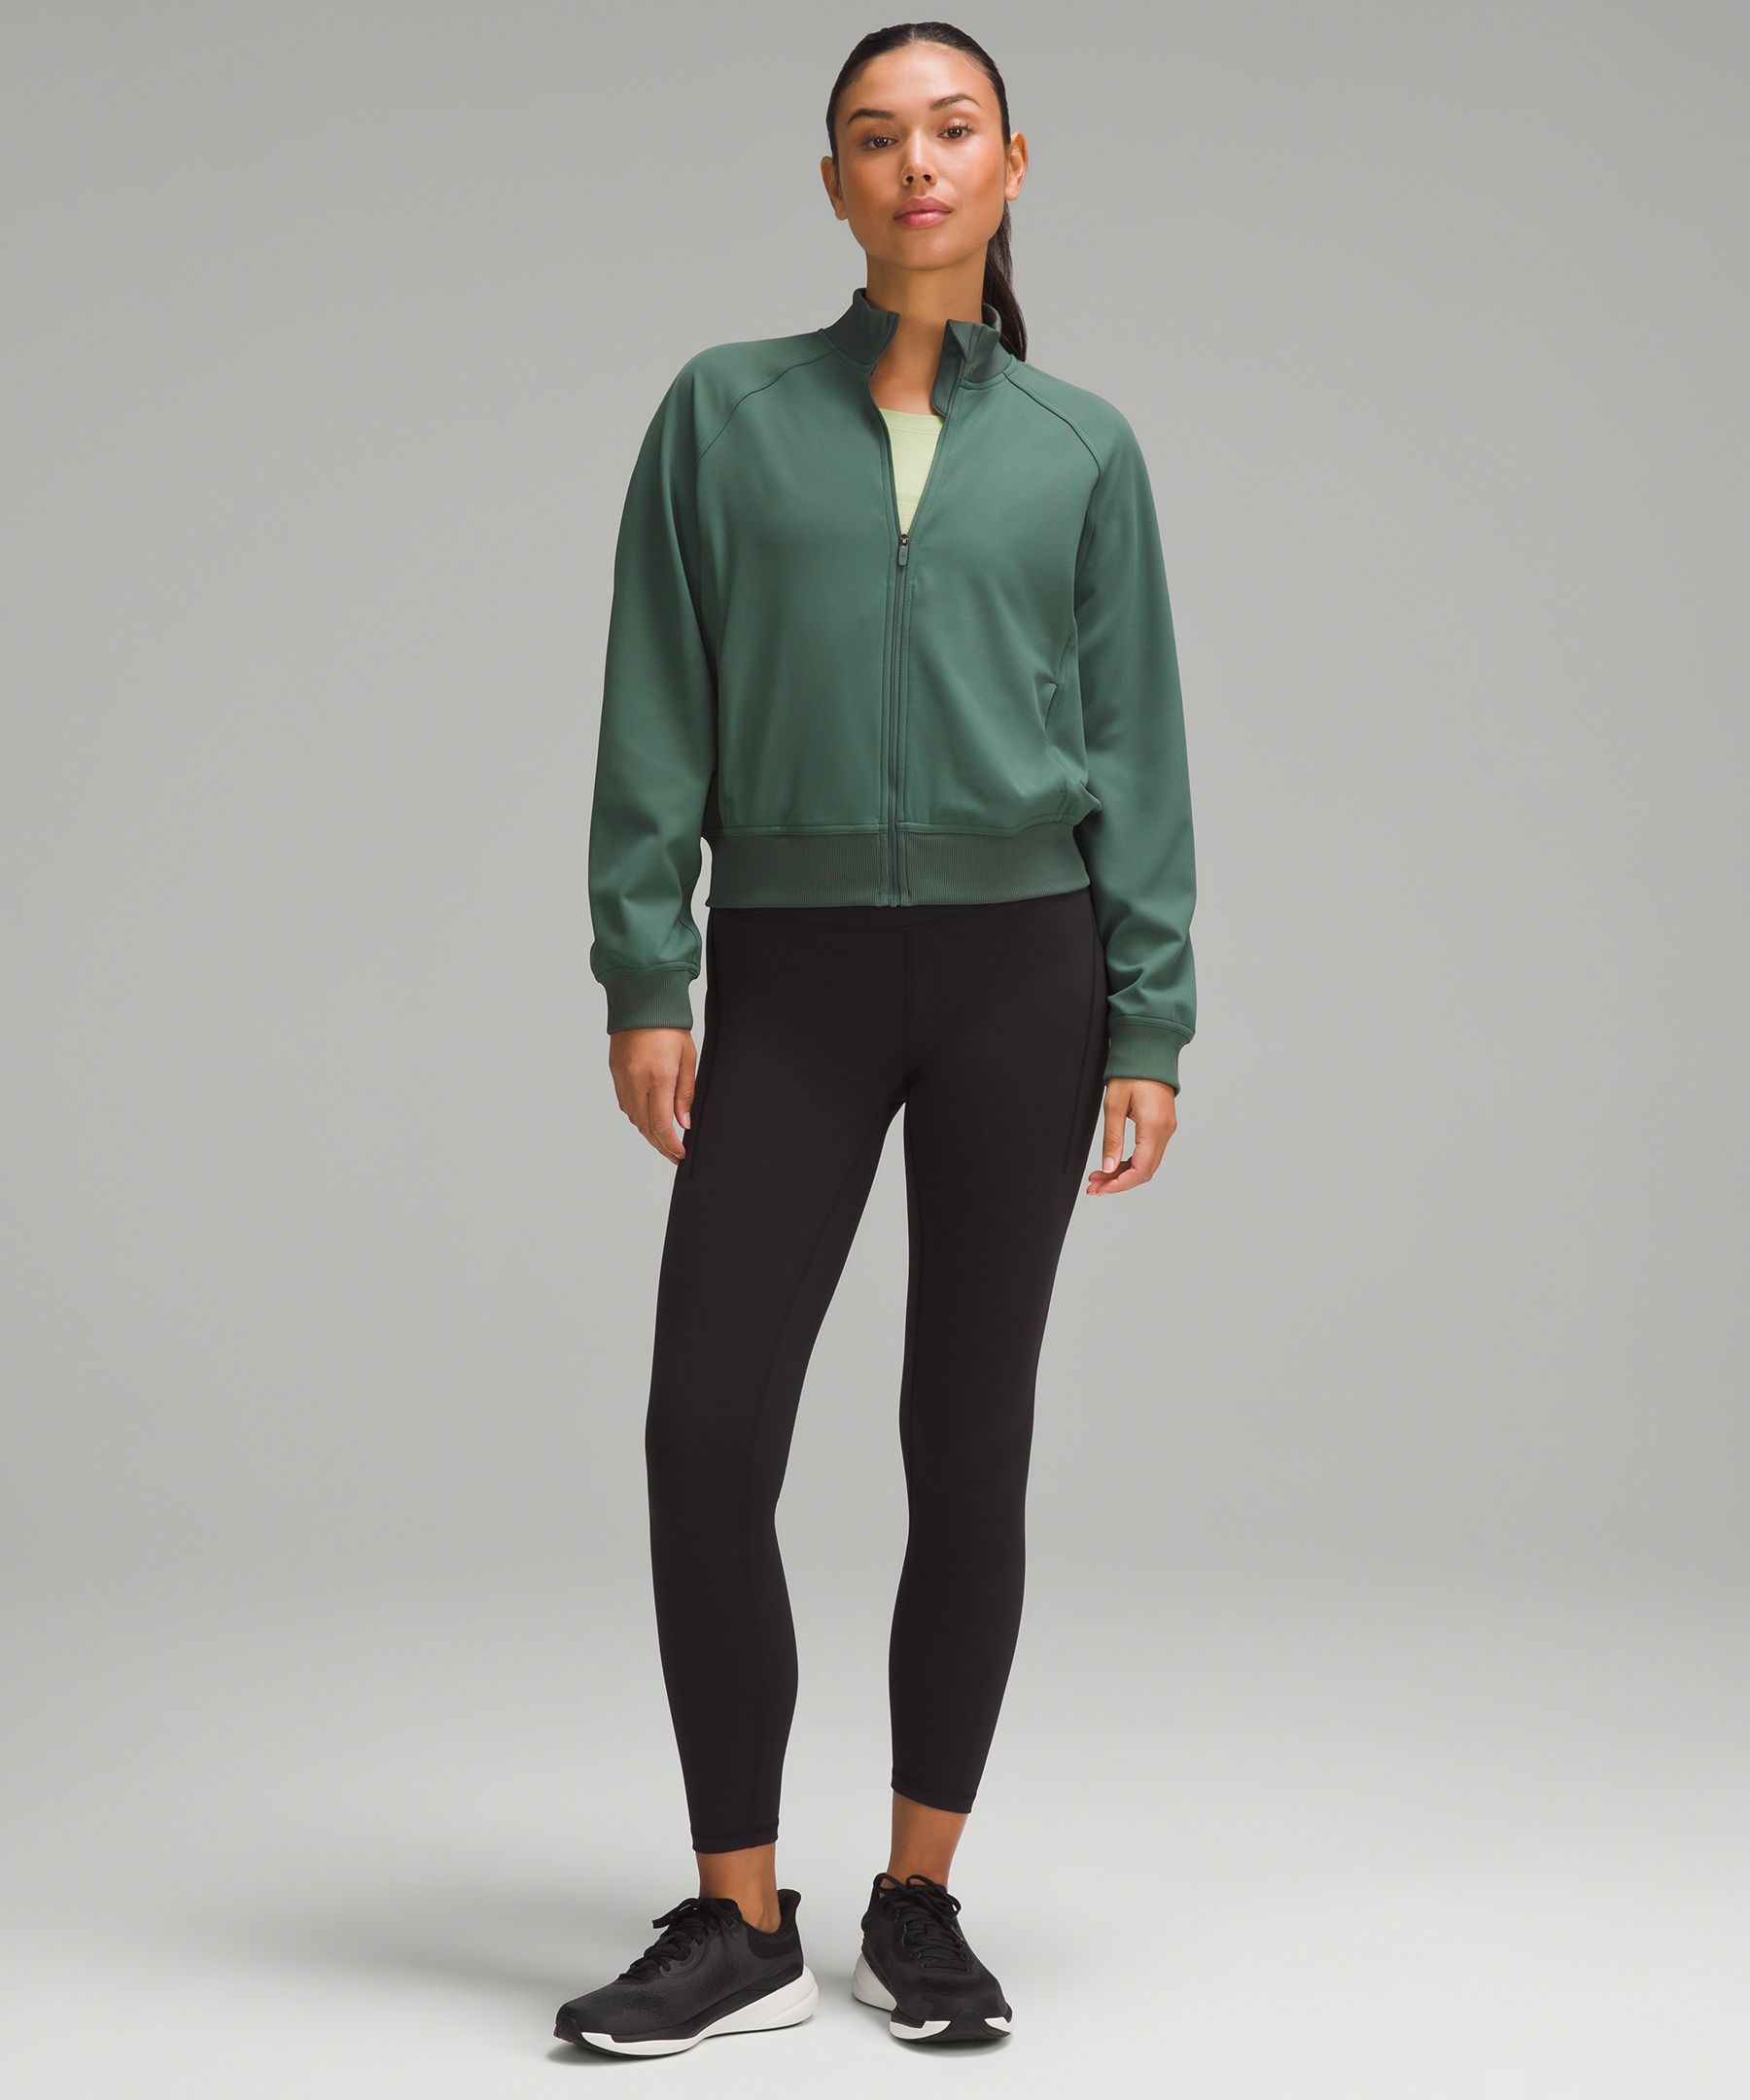 WMTM find! Gifted myself with it to celebrate going down a size. Wunder  Train and define jacket in willow green 😍 : r/lululemon